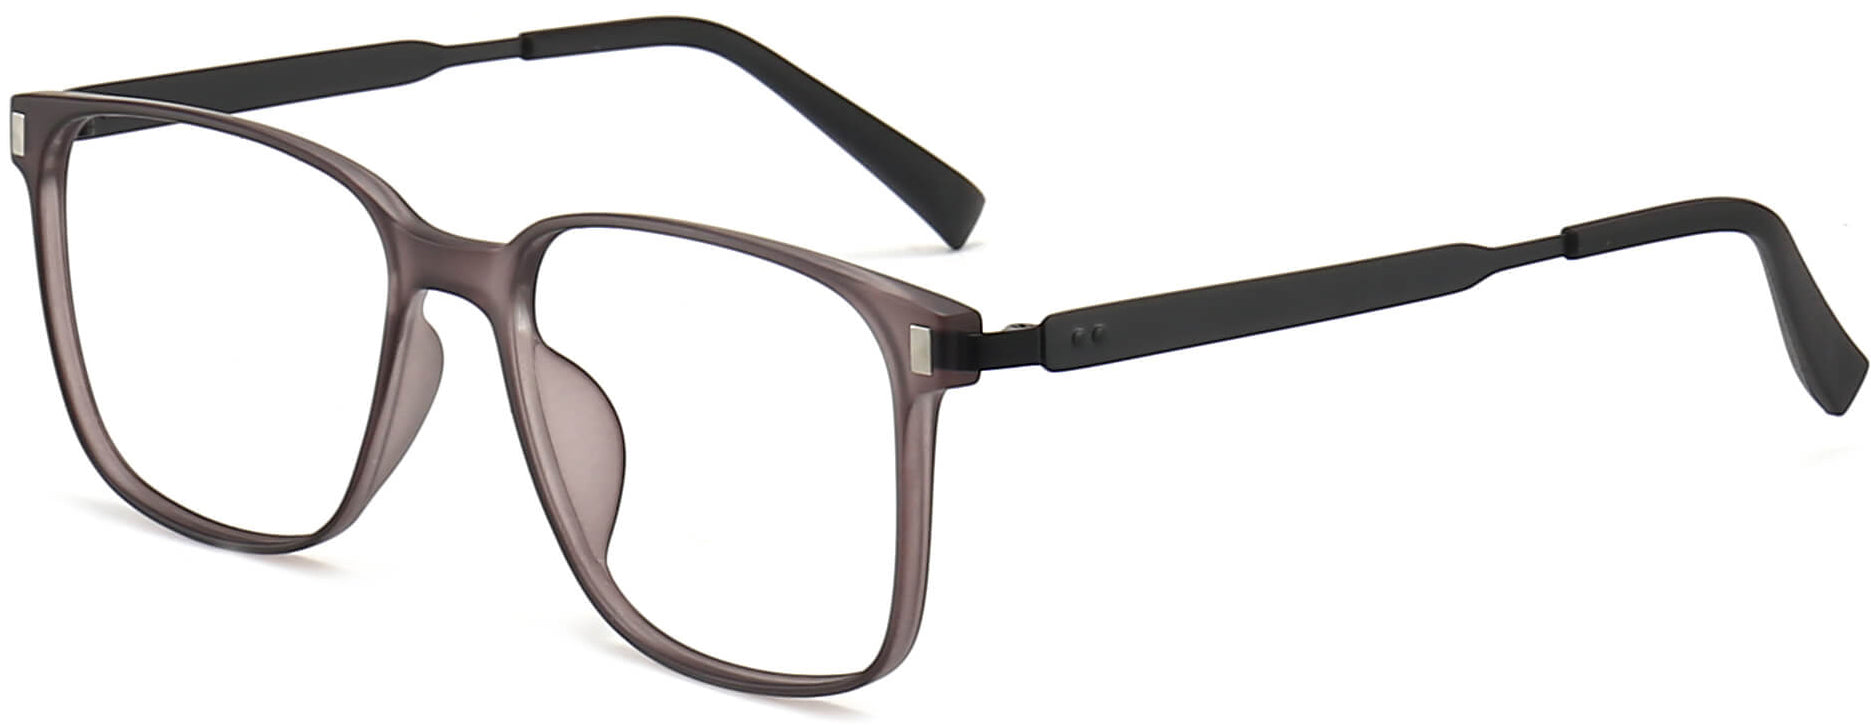 Cullen Square Gray Eyeglasses from ANRRI, angle view